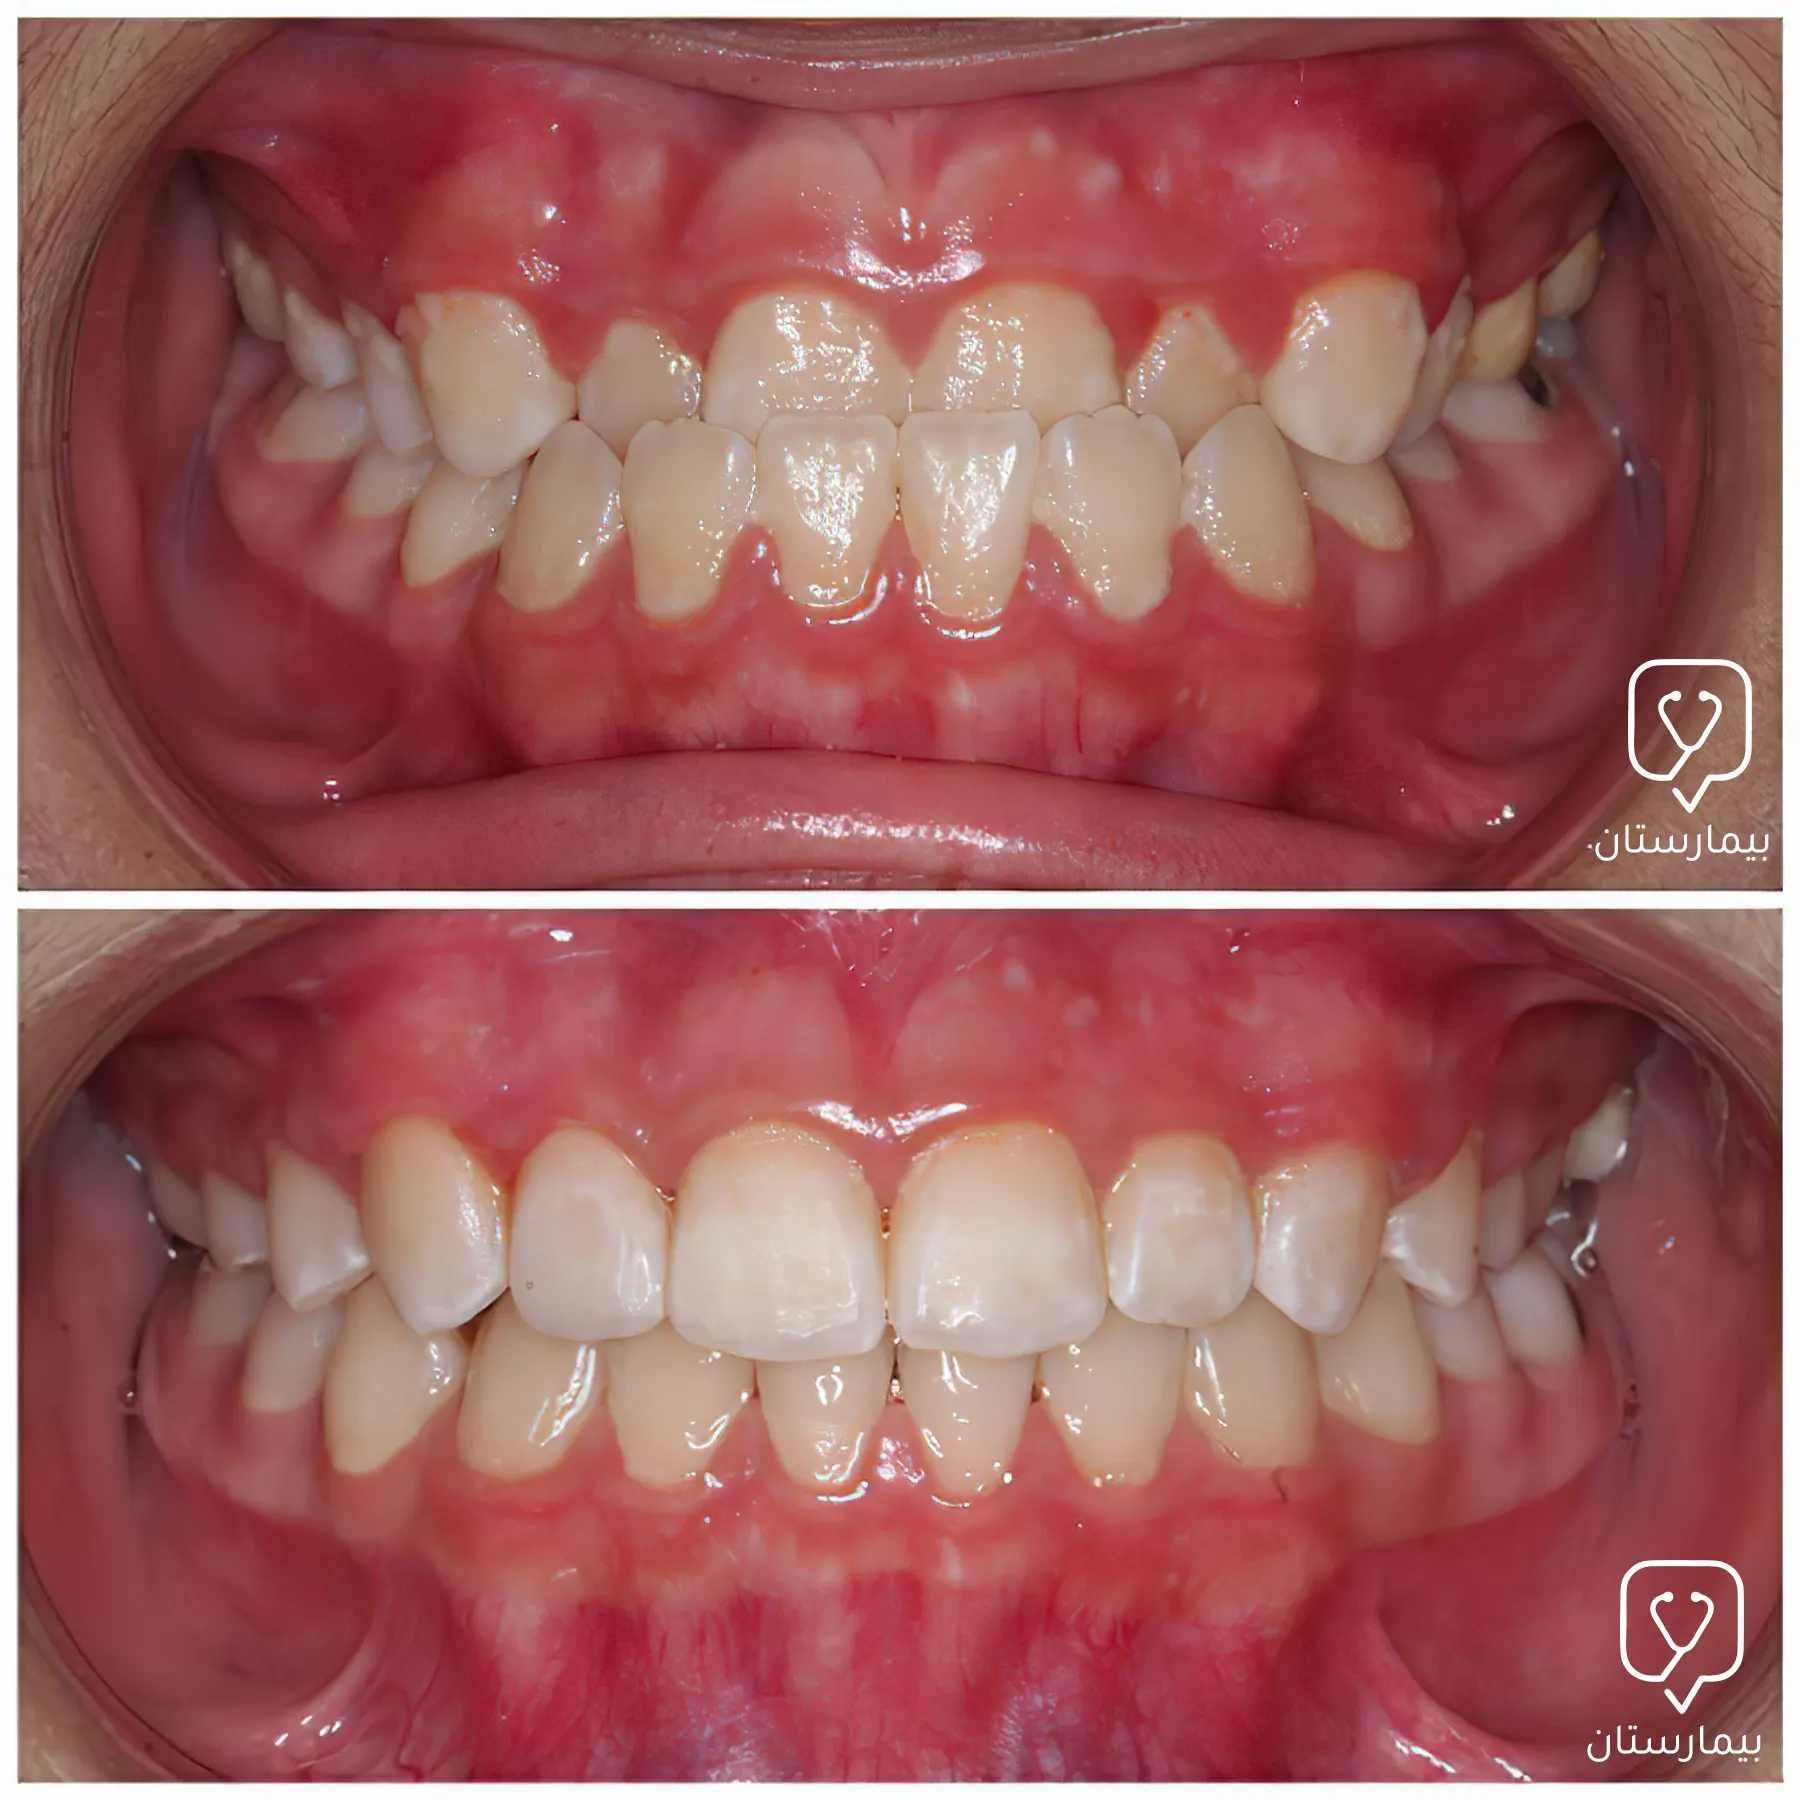 Before/After crossbite treatment